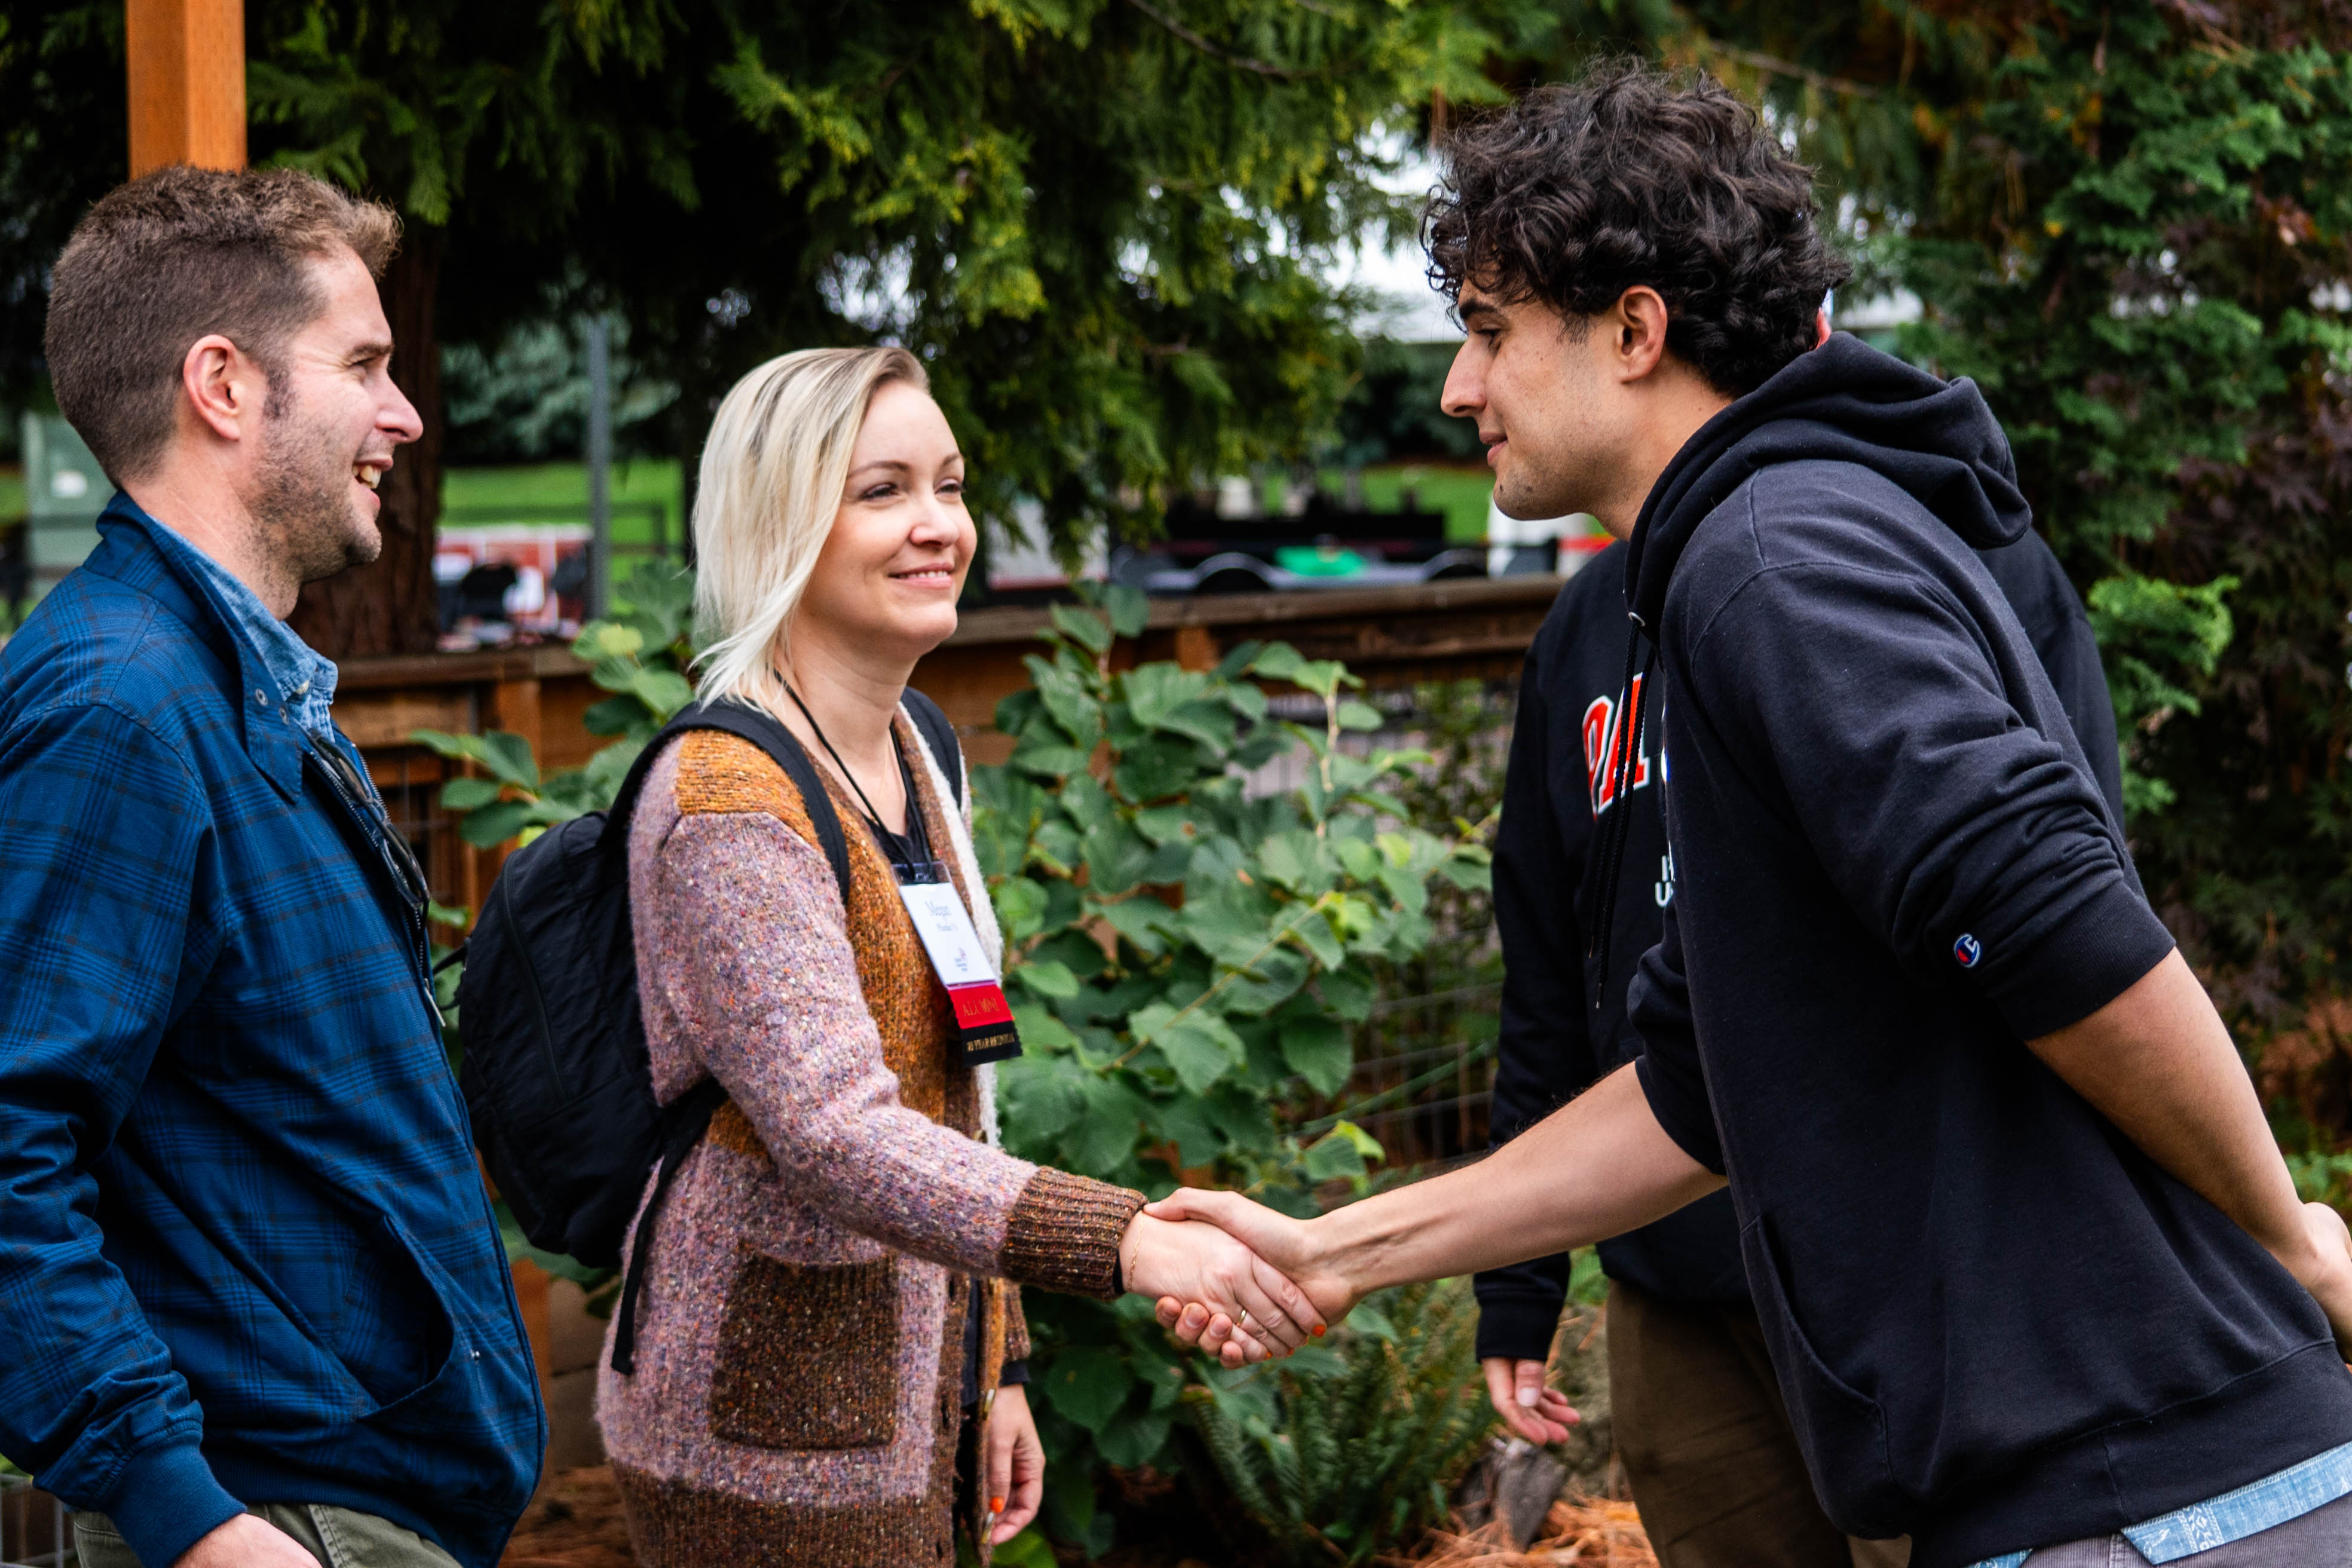 A current Pacific undergraduate students greets two alumni during Homecoming weekend.